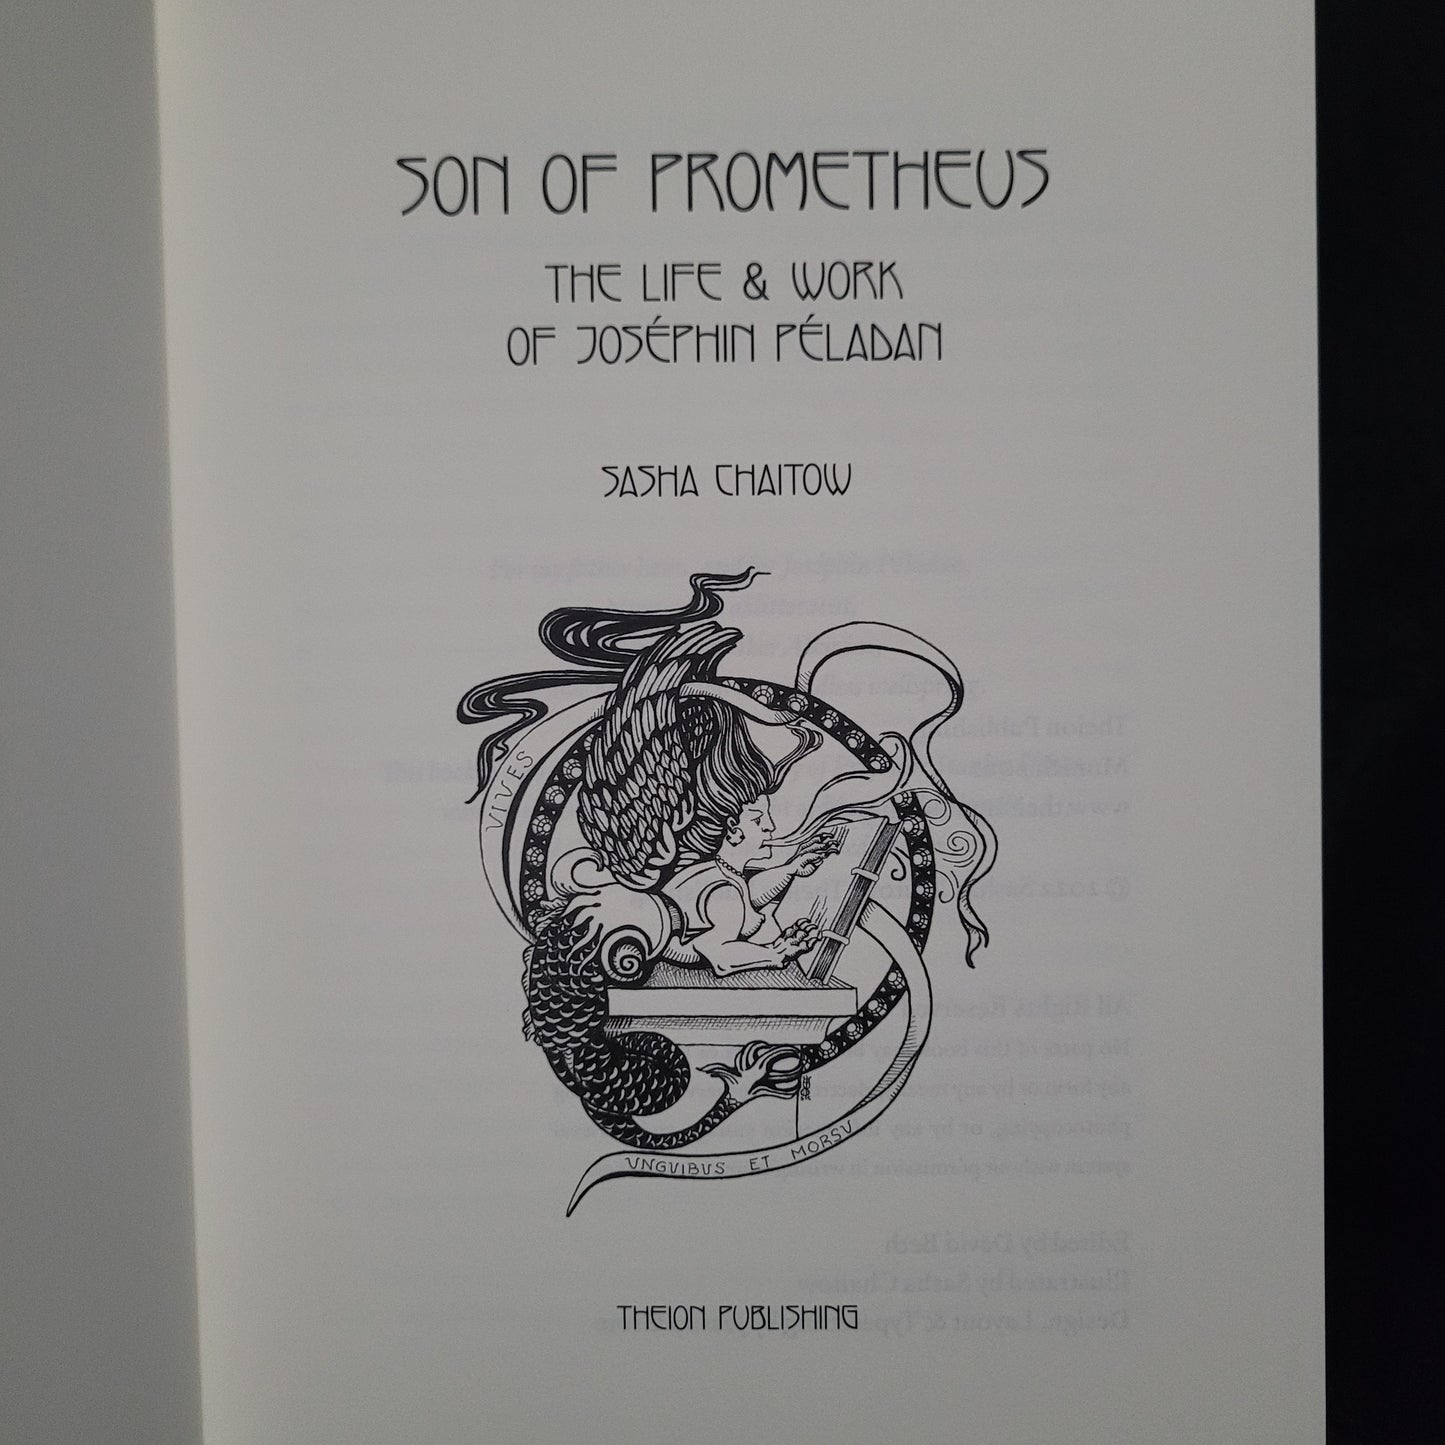 Son of Prometheus: The Life and Work of Joséphin Péladan by Sasha Chaitow (Theion Publishing, 2022) Deluxe Auric Edition # 9/46